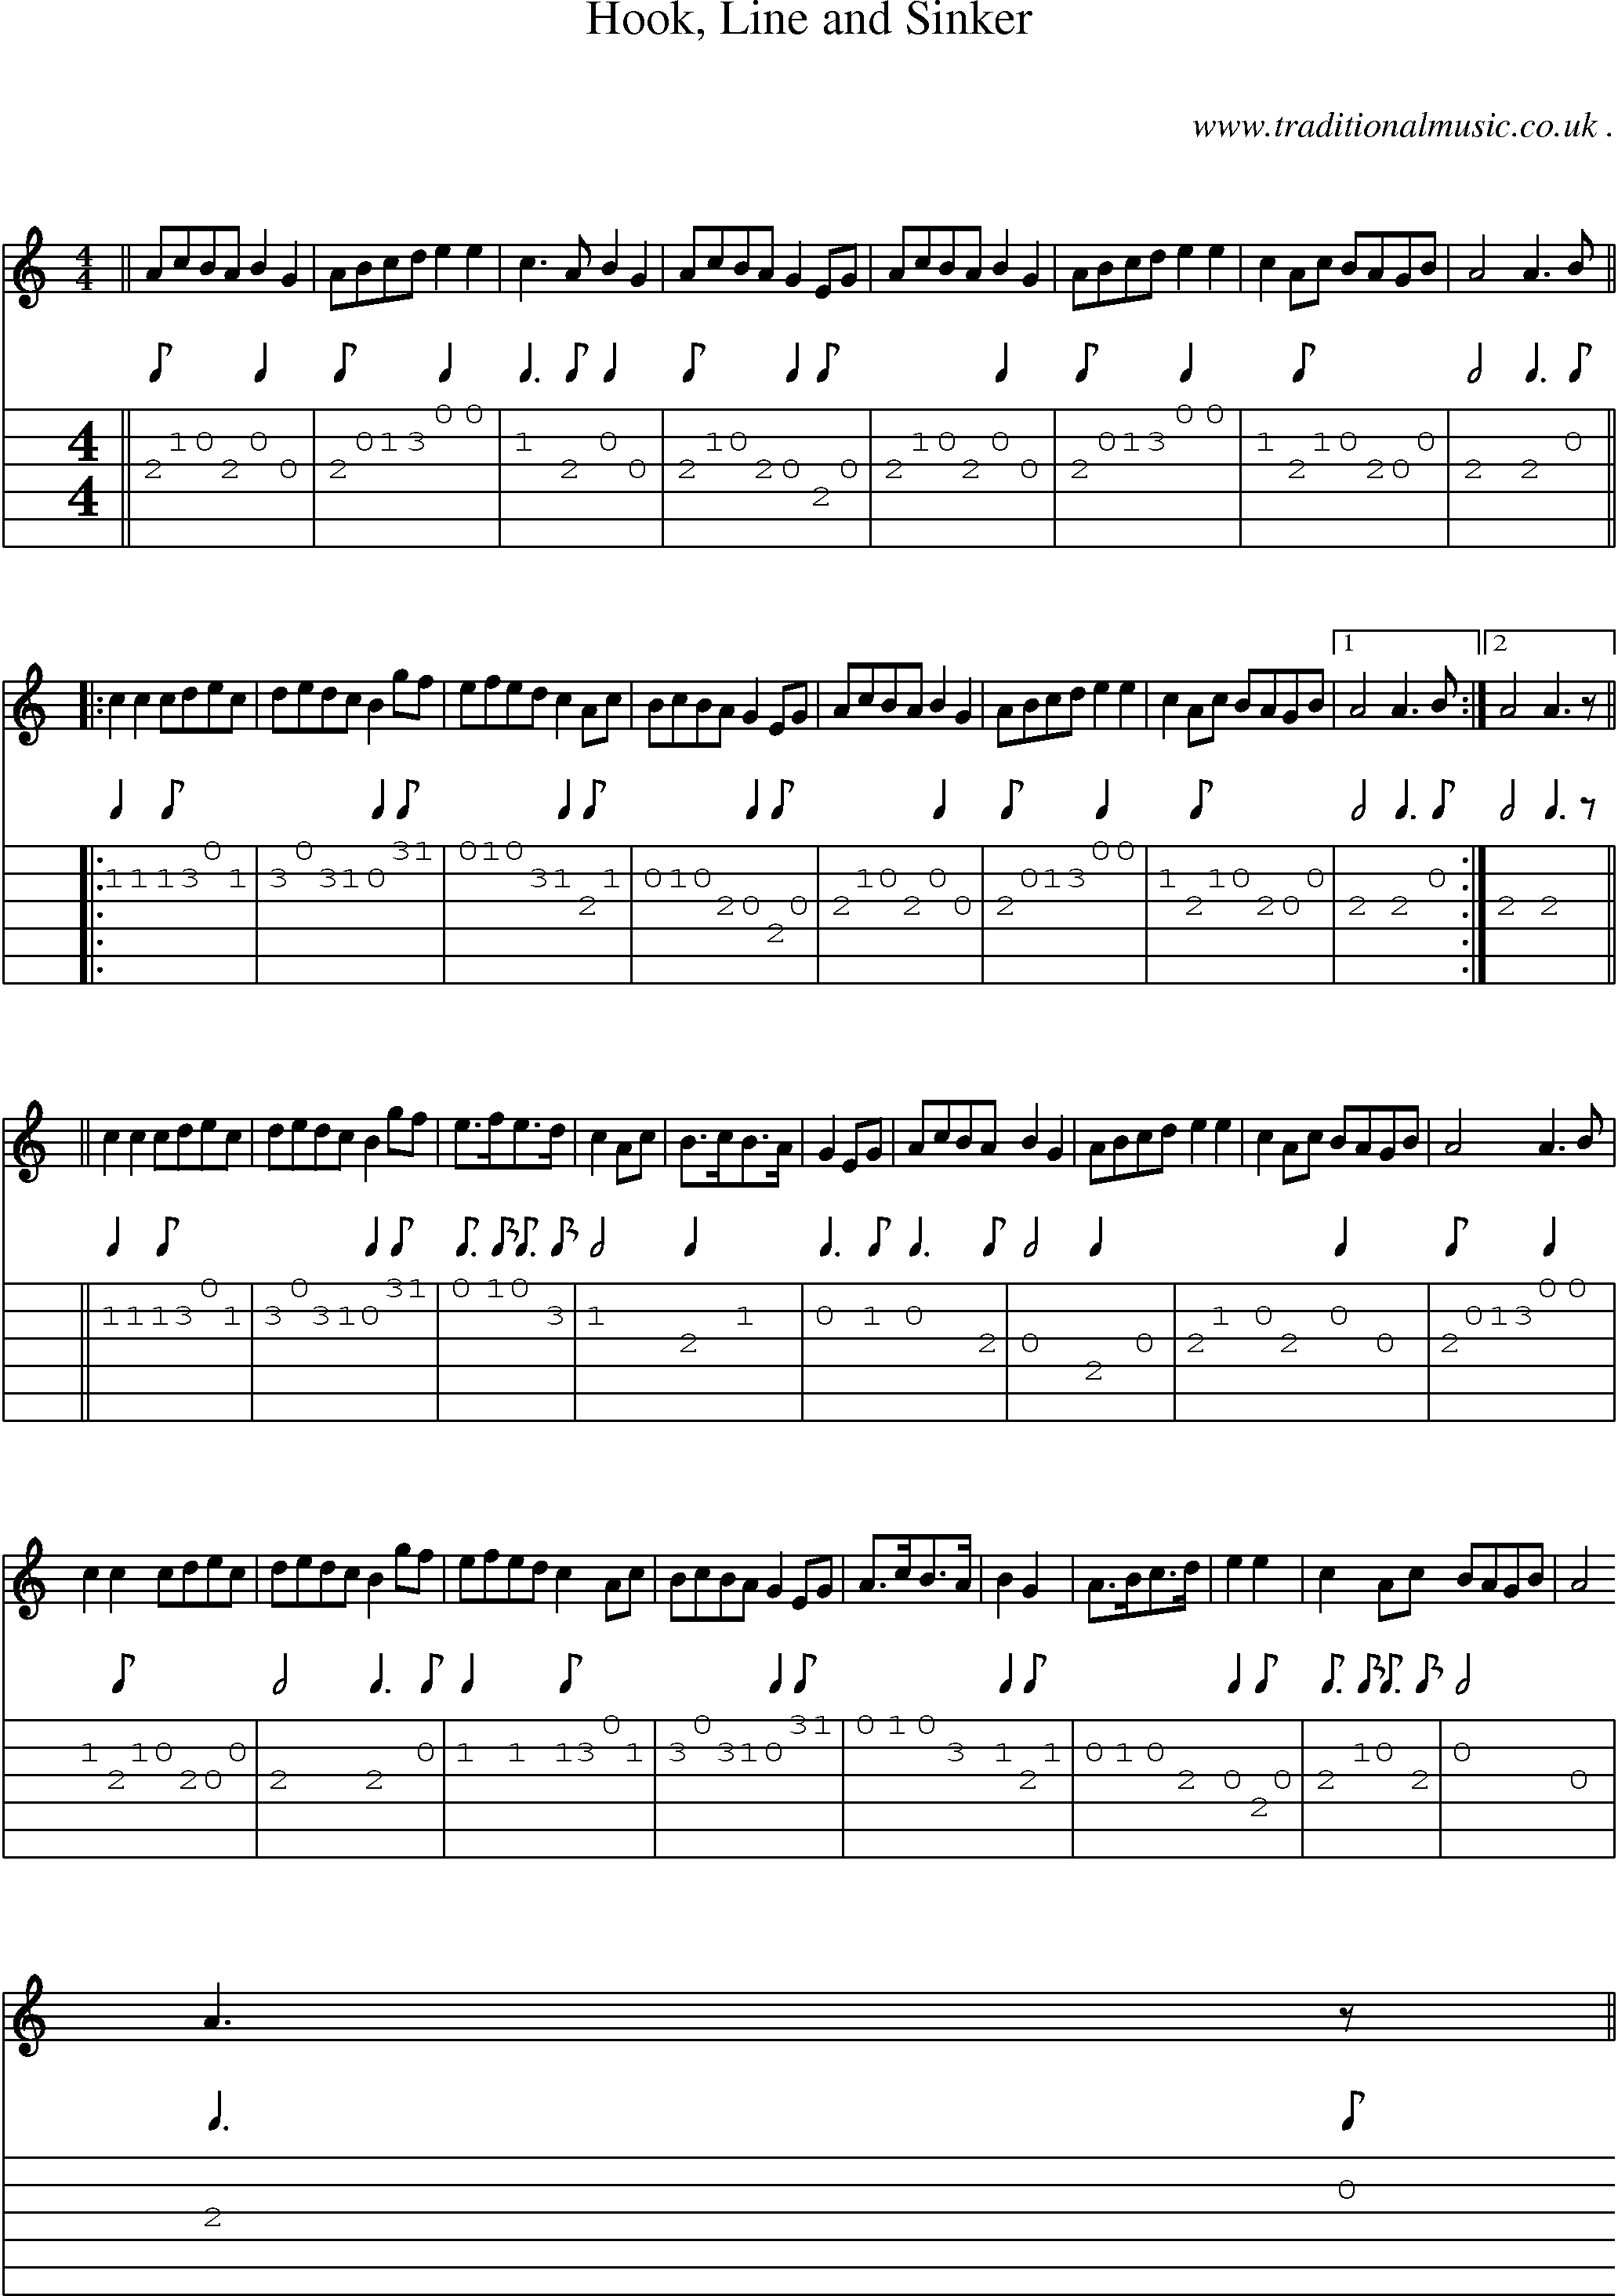 Sheet-Music and Guitar Tabs for Hook Line And Sinker